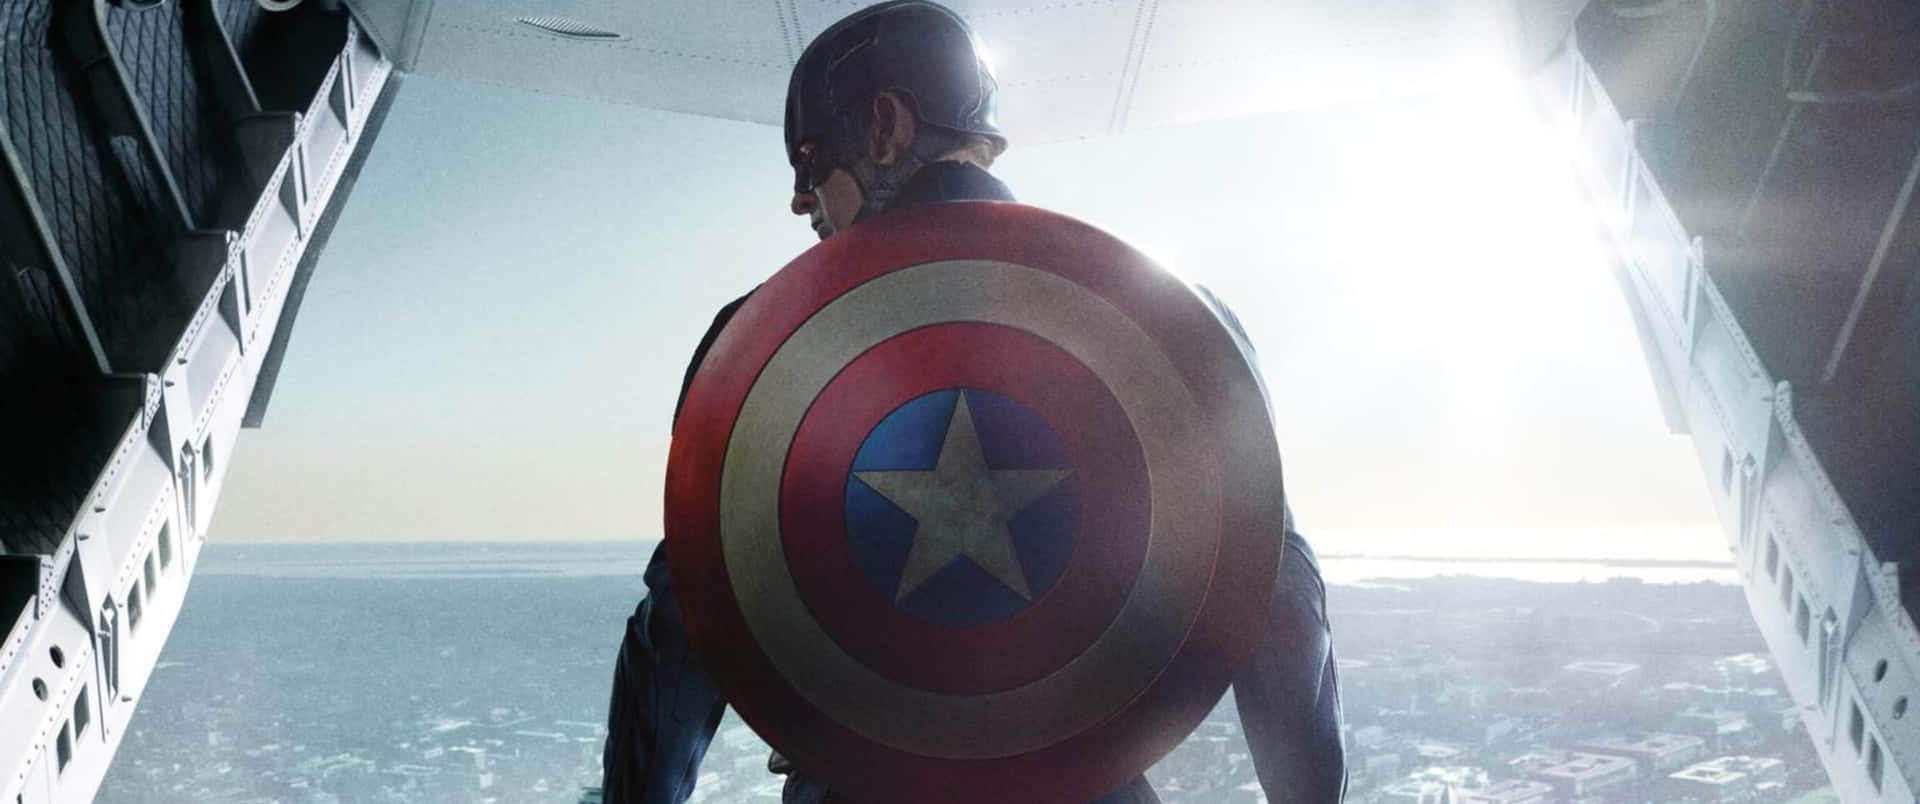 “Ready for Action: Marvel's Iconic Hero Captain America”